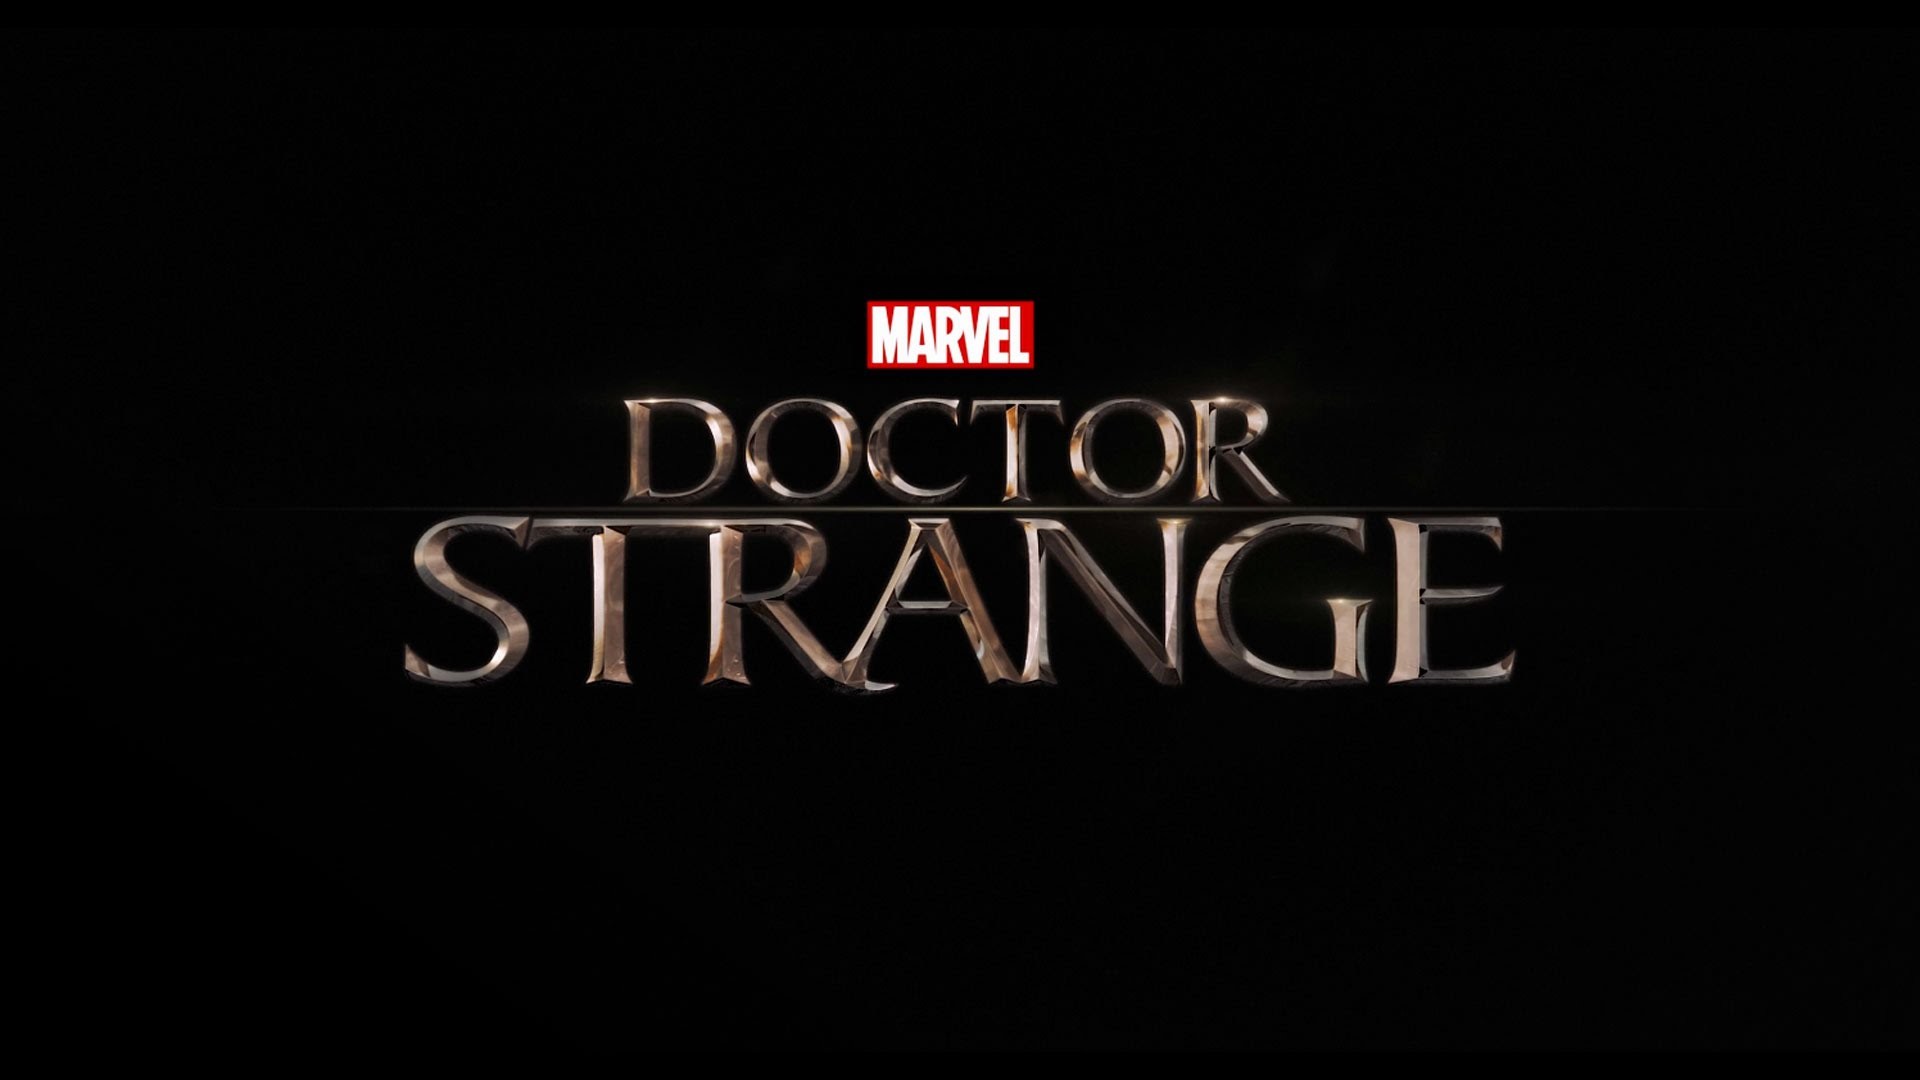 1920x1080 Doctor Strange Running Time and Movie Wallpapers